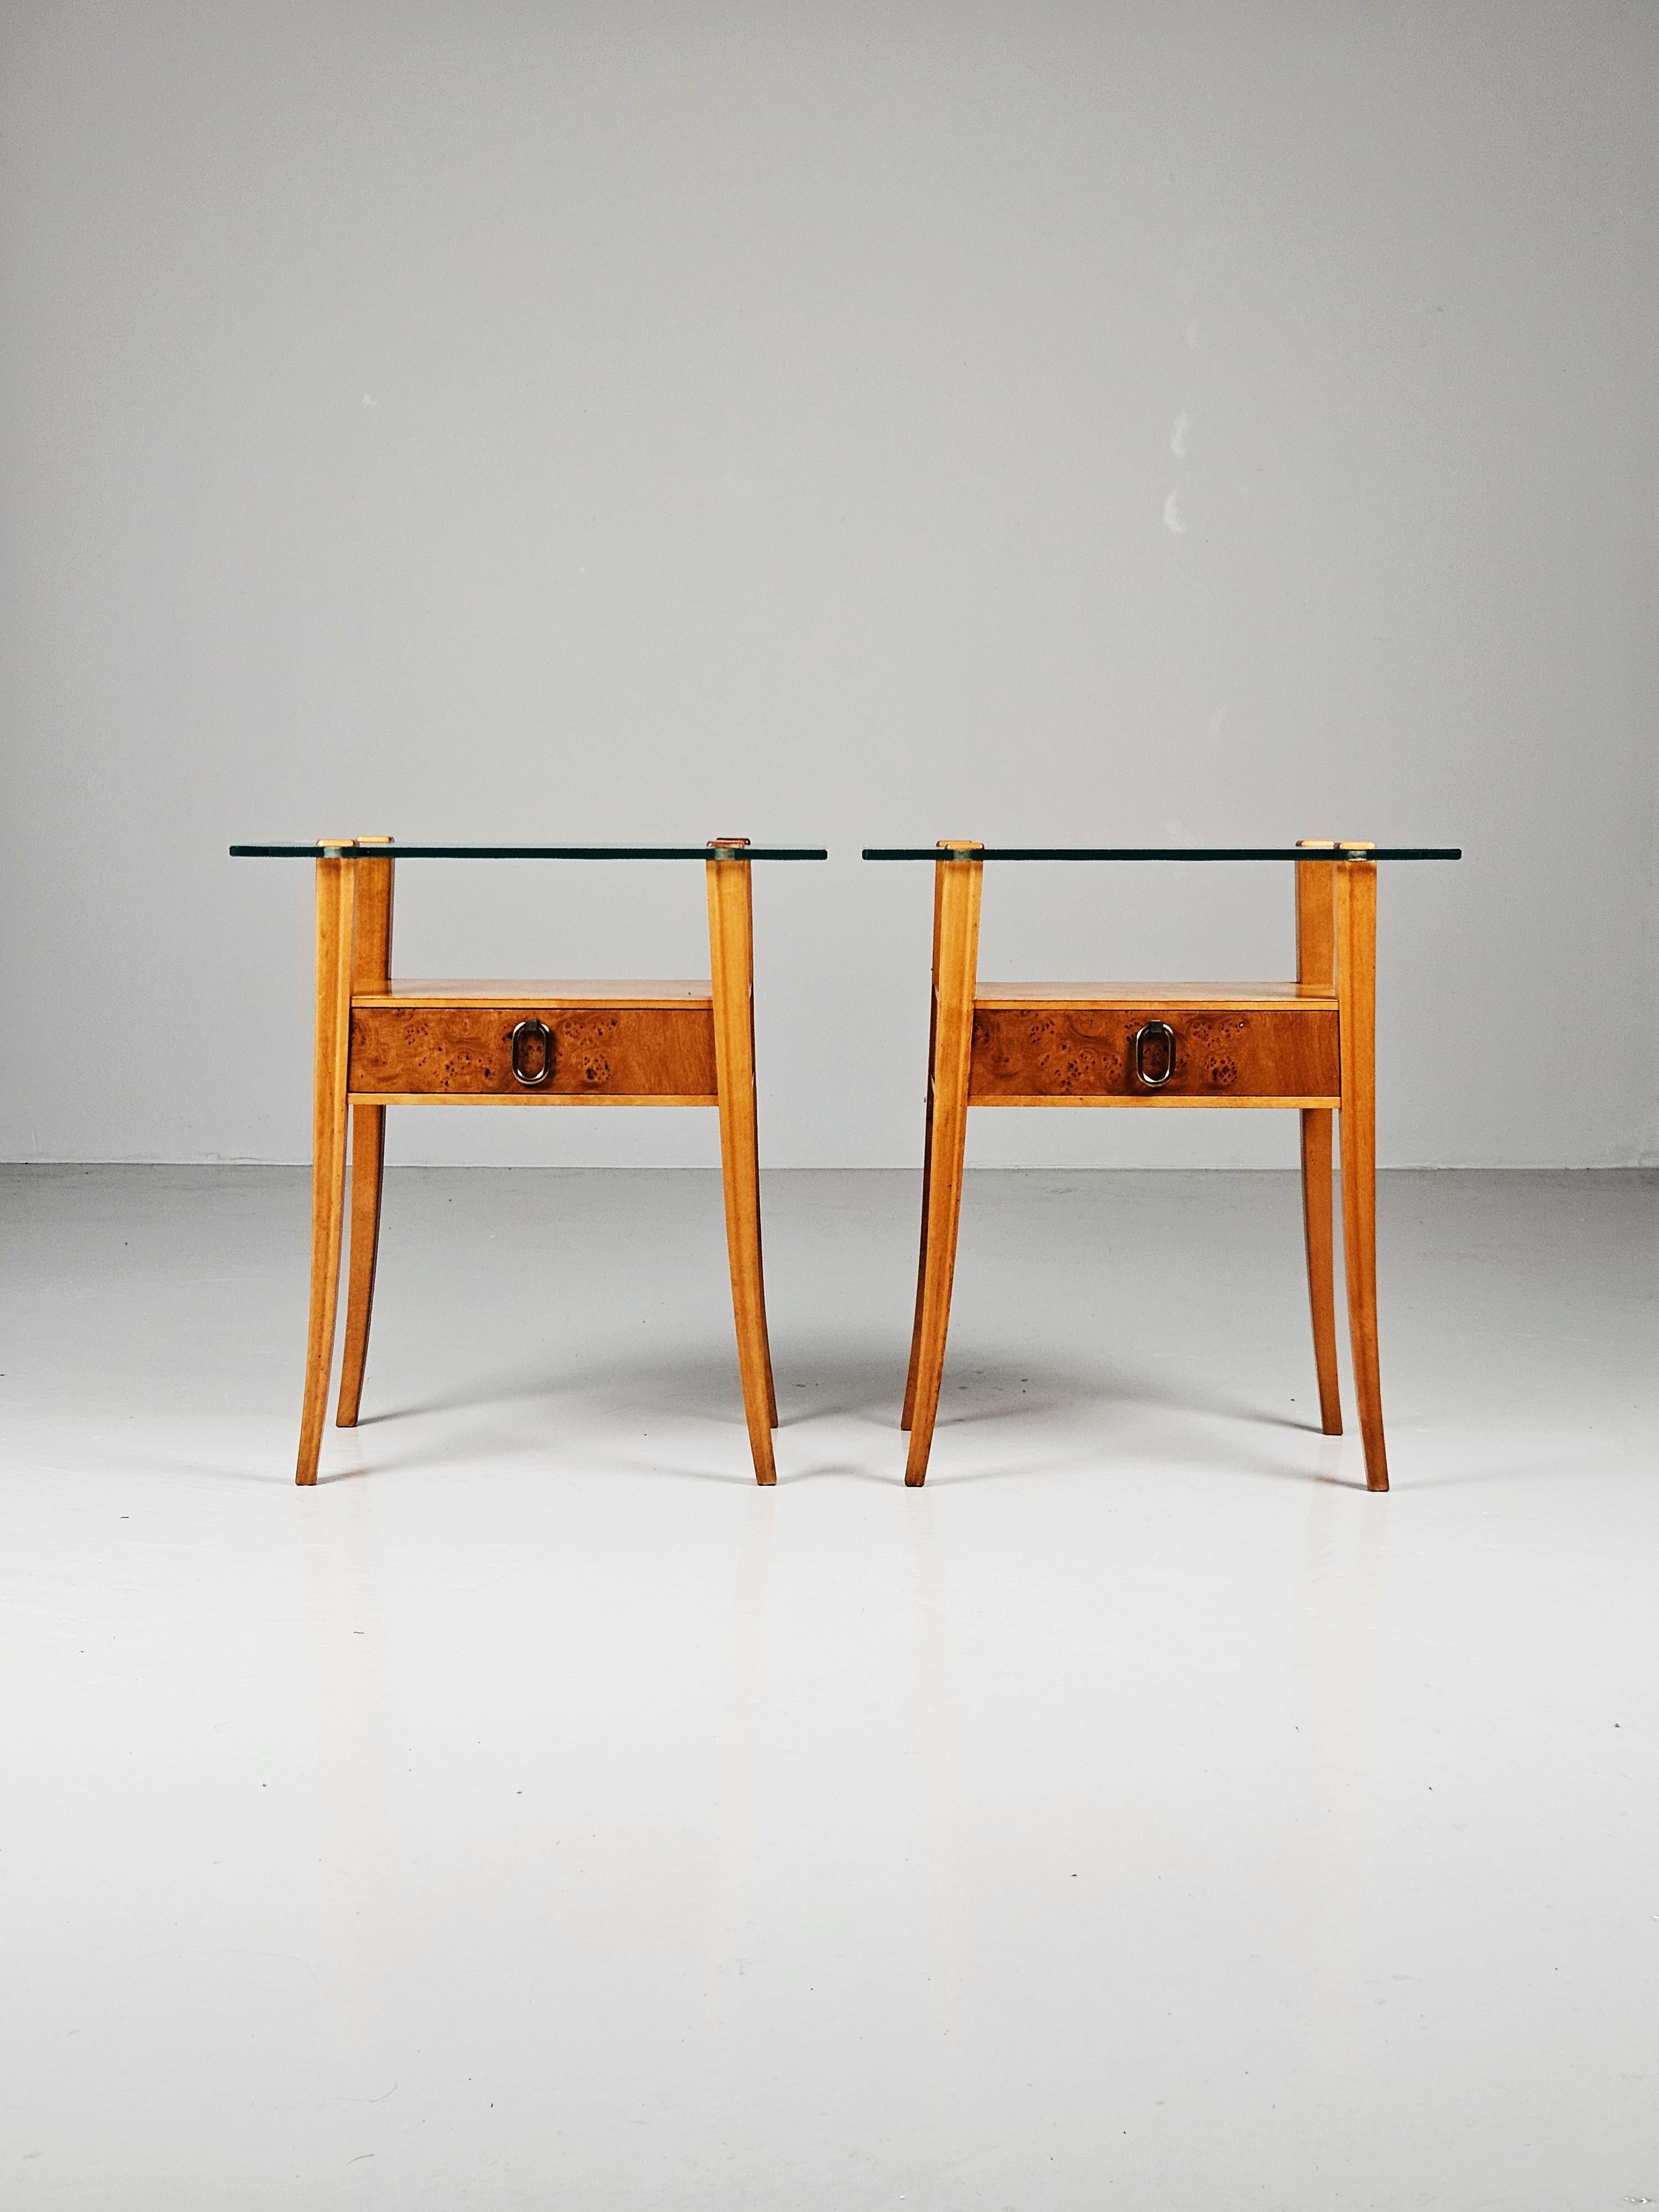 Beautiful pair of bedside tables produced by Svenska Möbelfabrikerna Bodafors, Sweden, during the 1950s. 

Made in birch with a root veneer on drawers with a slick brass handle. Beautiful glass top. 

Design similar to creations of Axel Larsson and